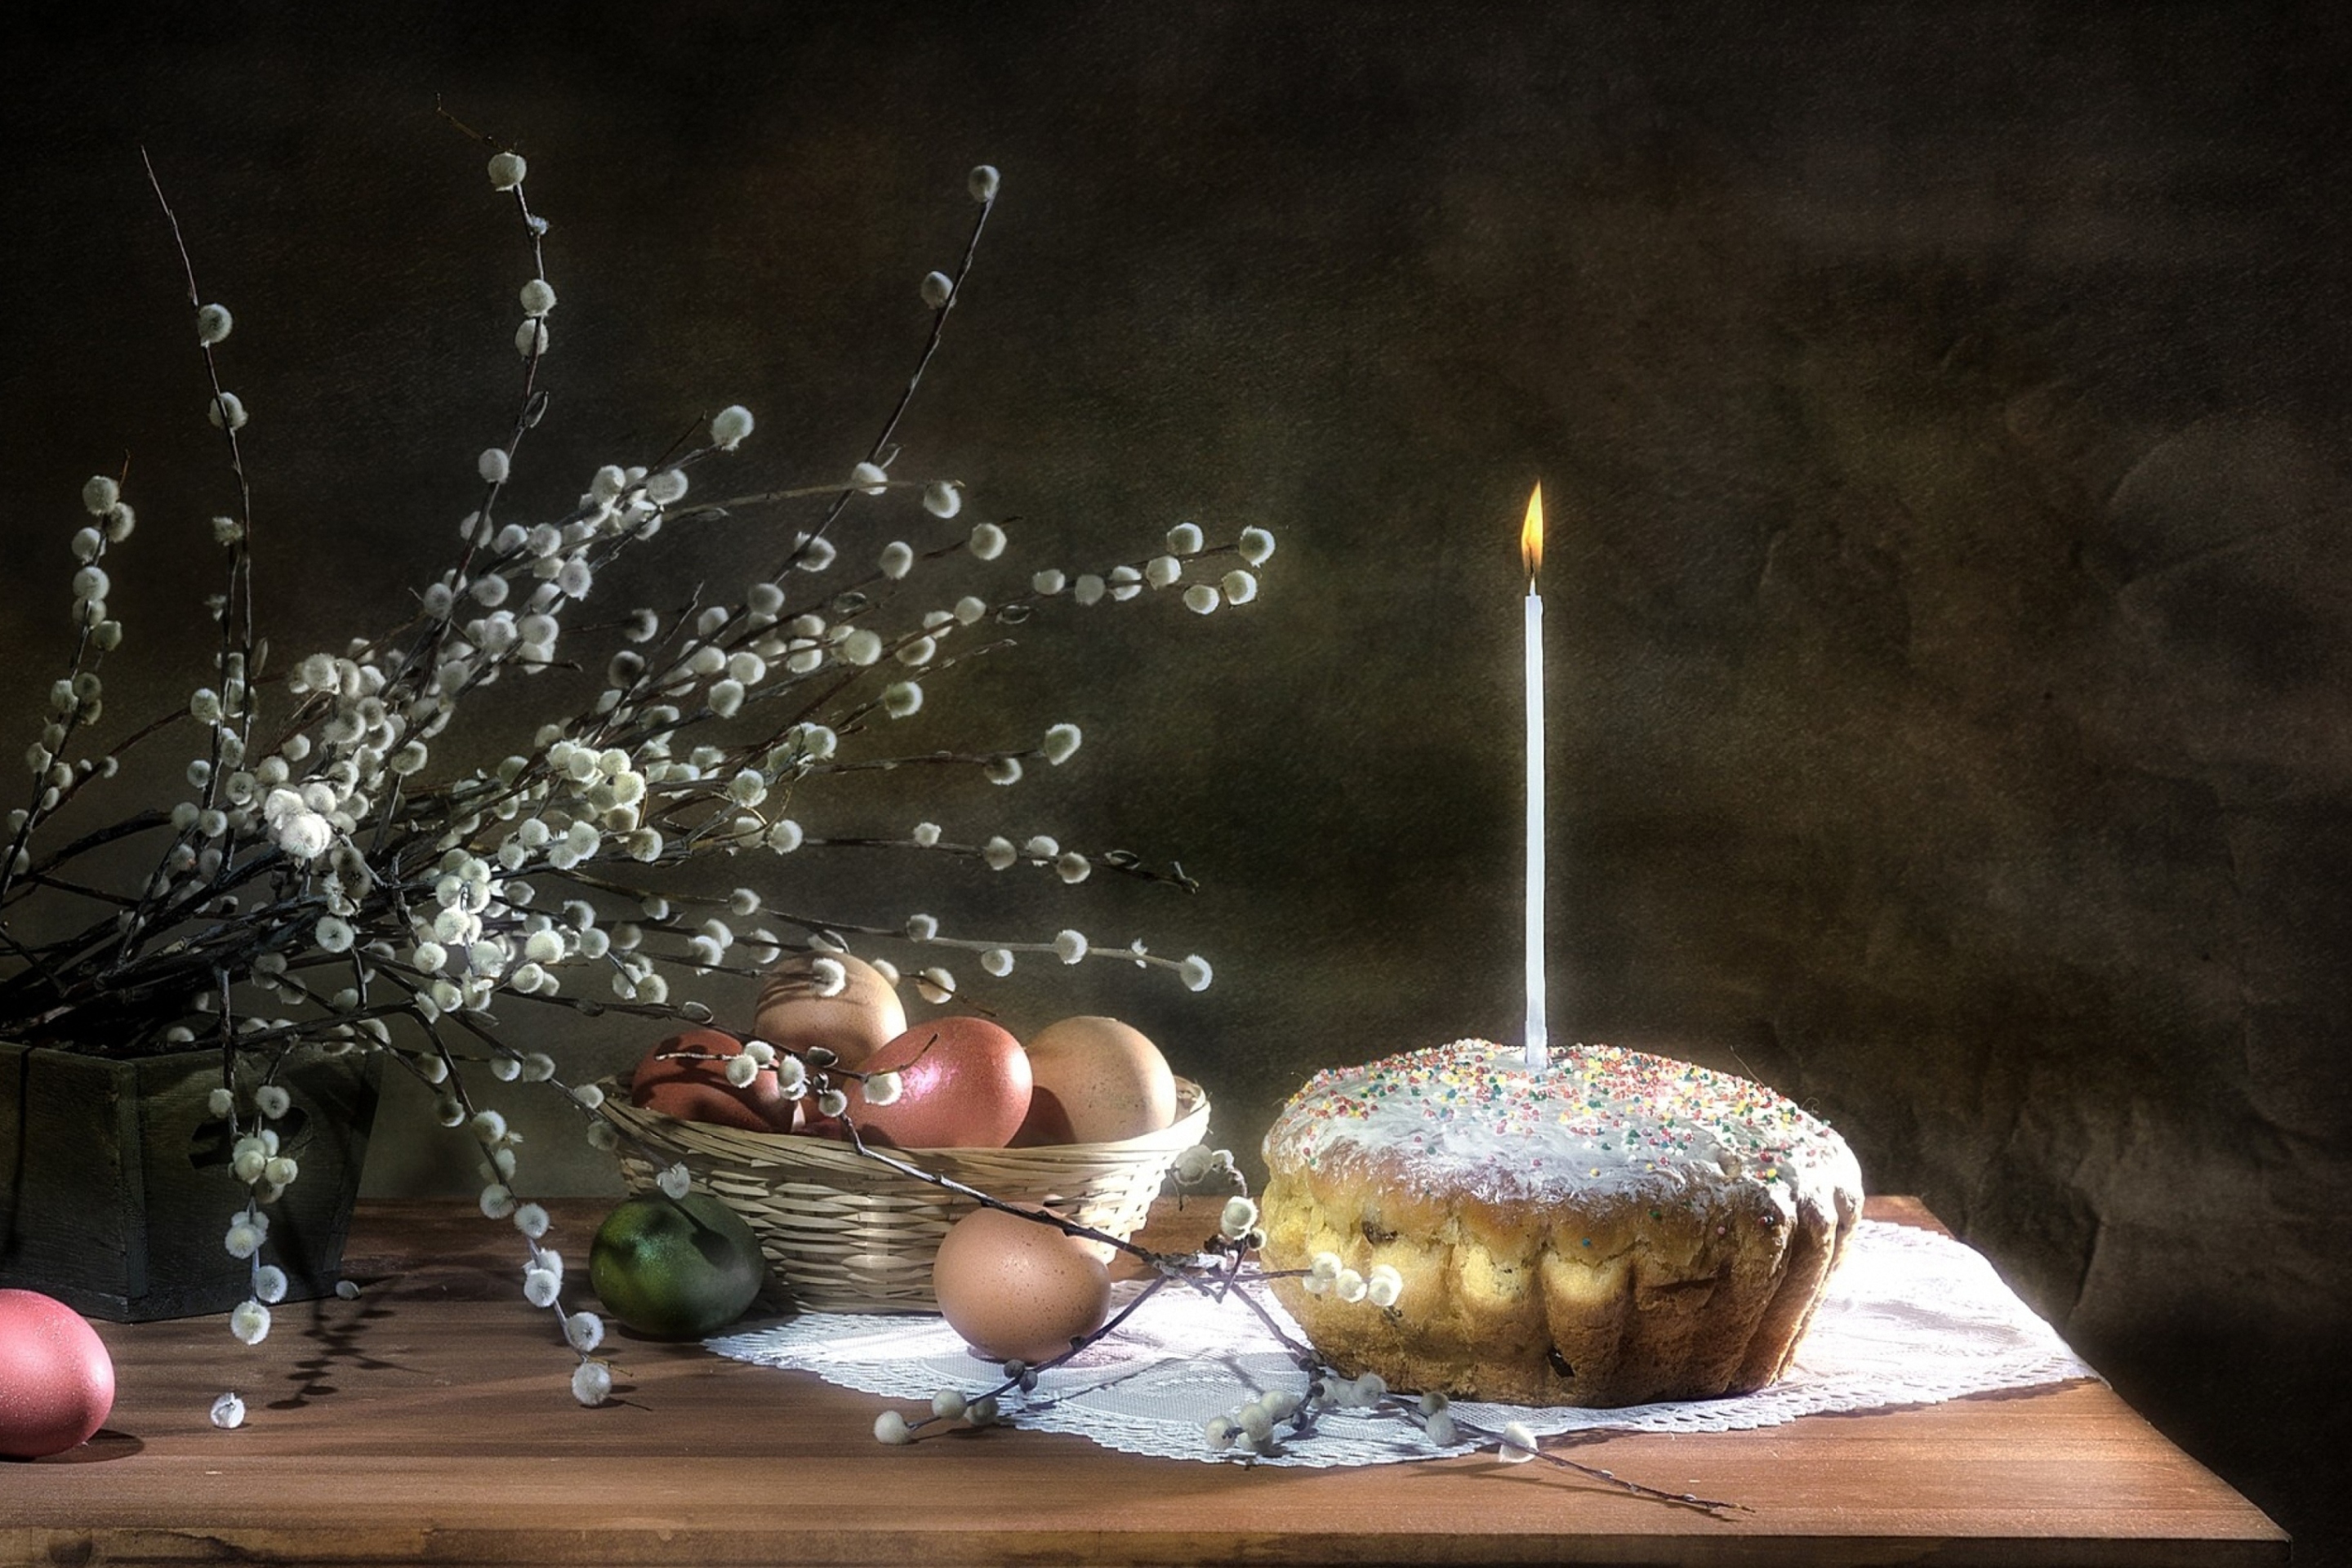 Easter Cake With Candle wallpaper 2880x1920